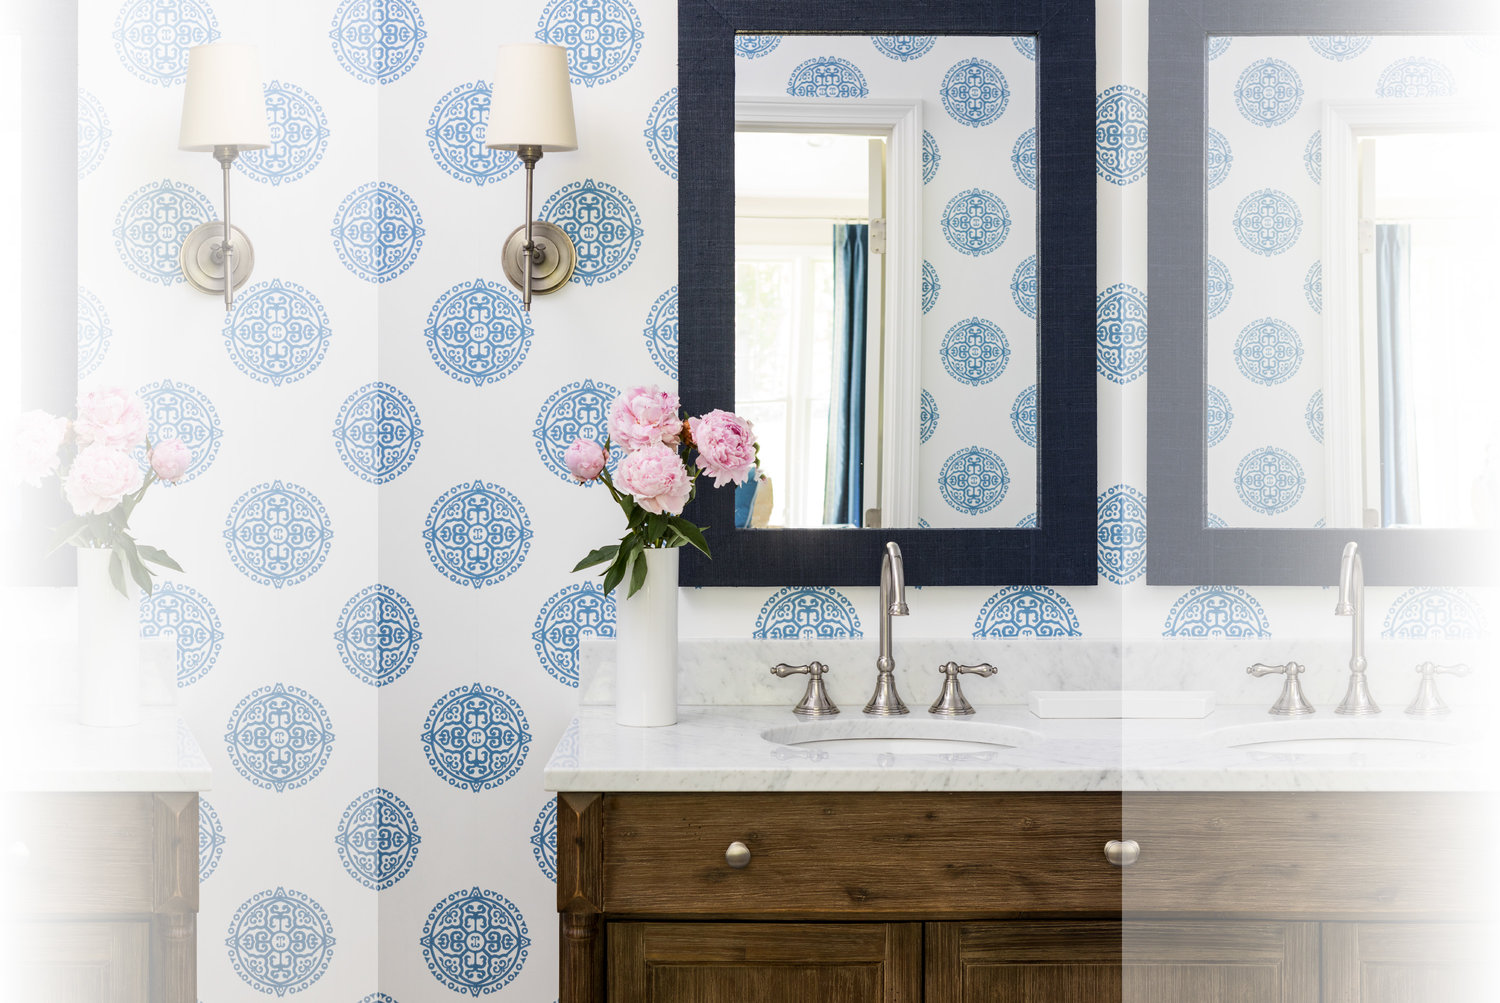 “Powder rooms are the perfect place for pretty wallpapers,” says Janelle Blakely